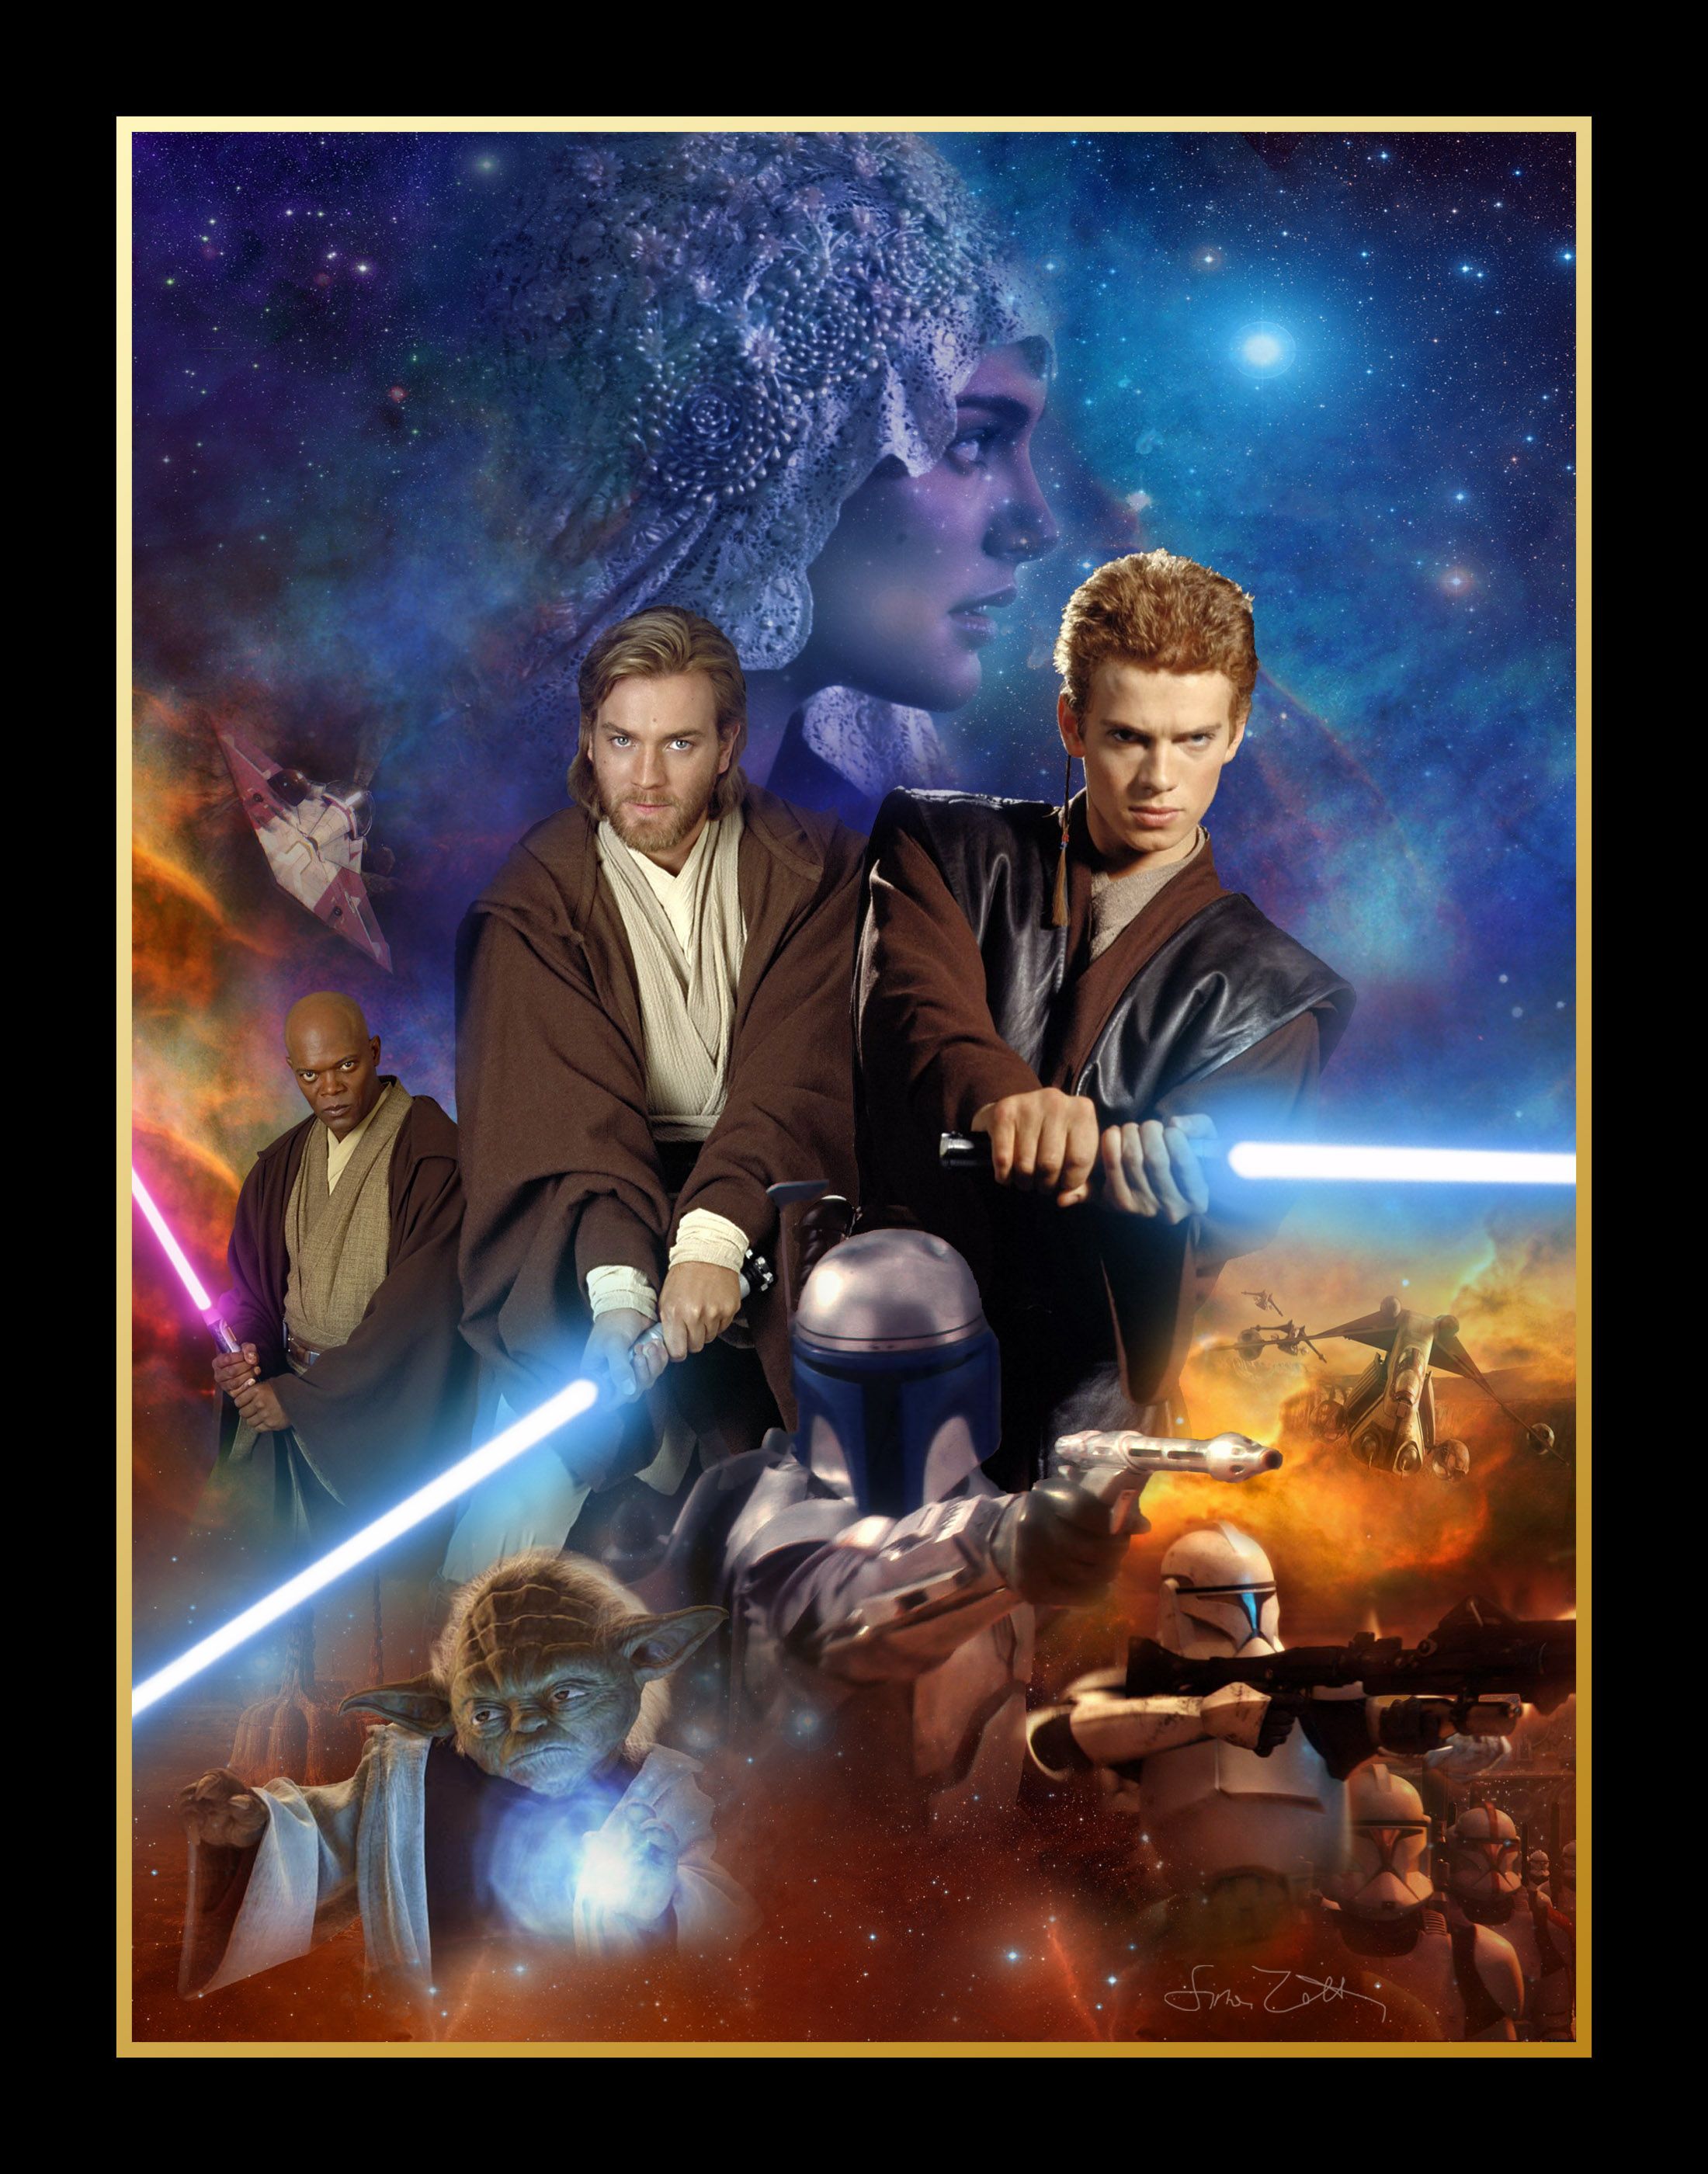 Star Wars of the Clones Poster. Star wars episodes, Star